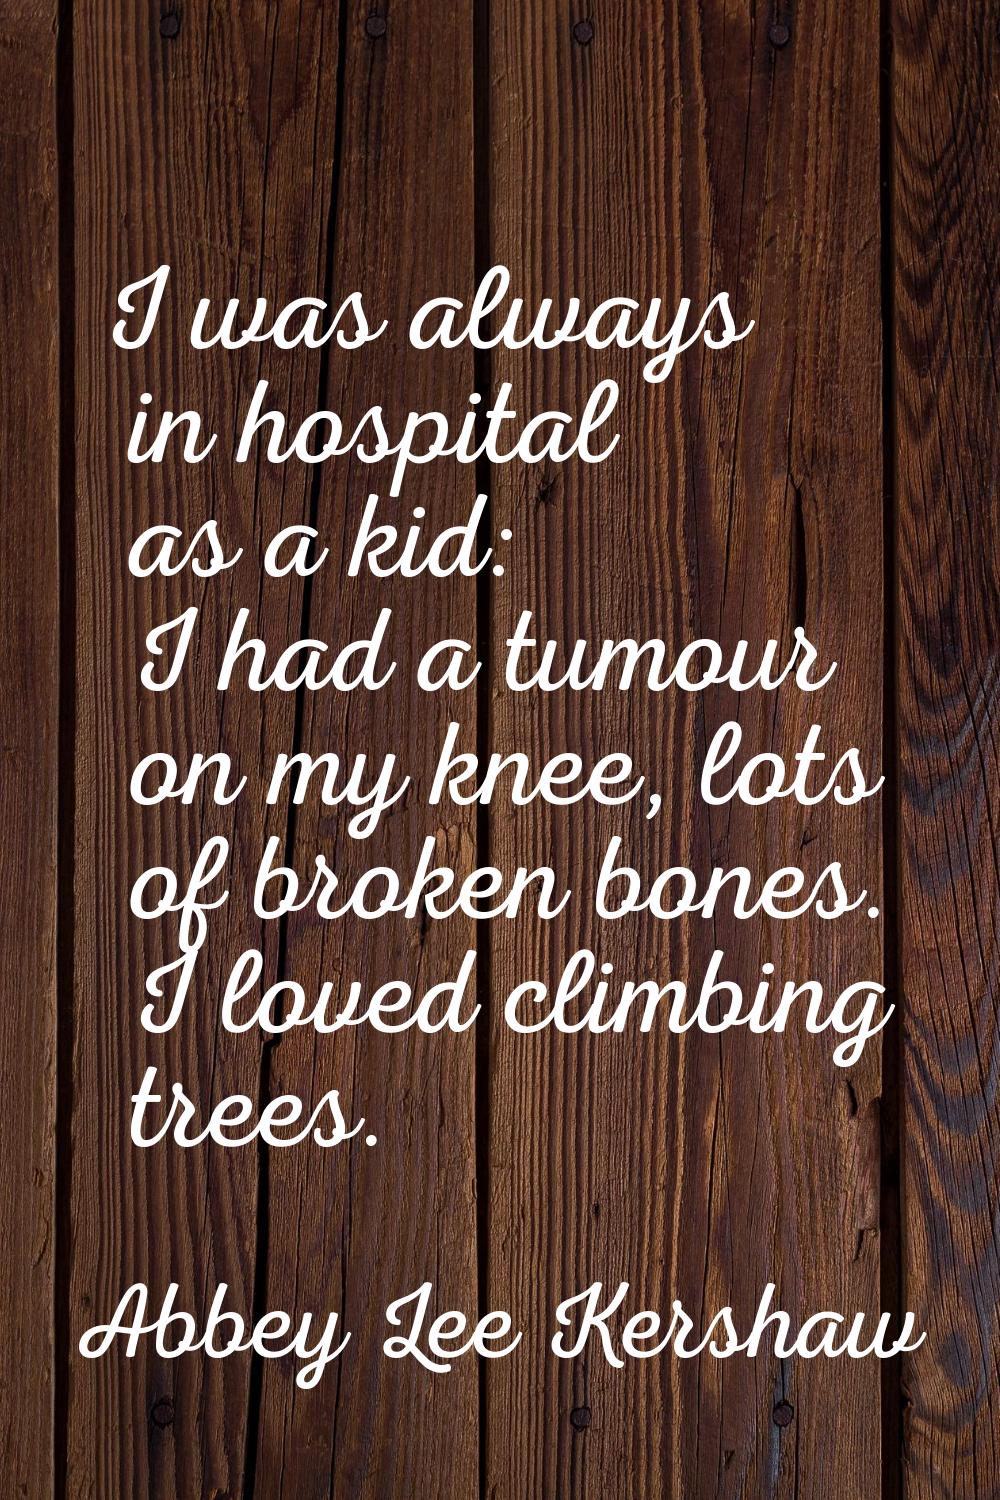 I was always in hospital as a kid: I had a tumour on my knee, lots of broken bones. I loved climbin